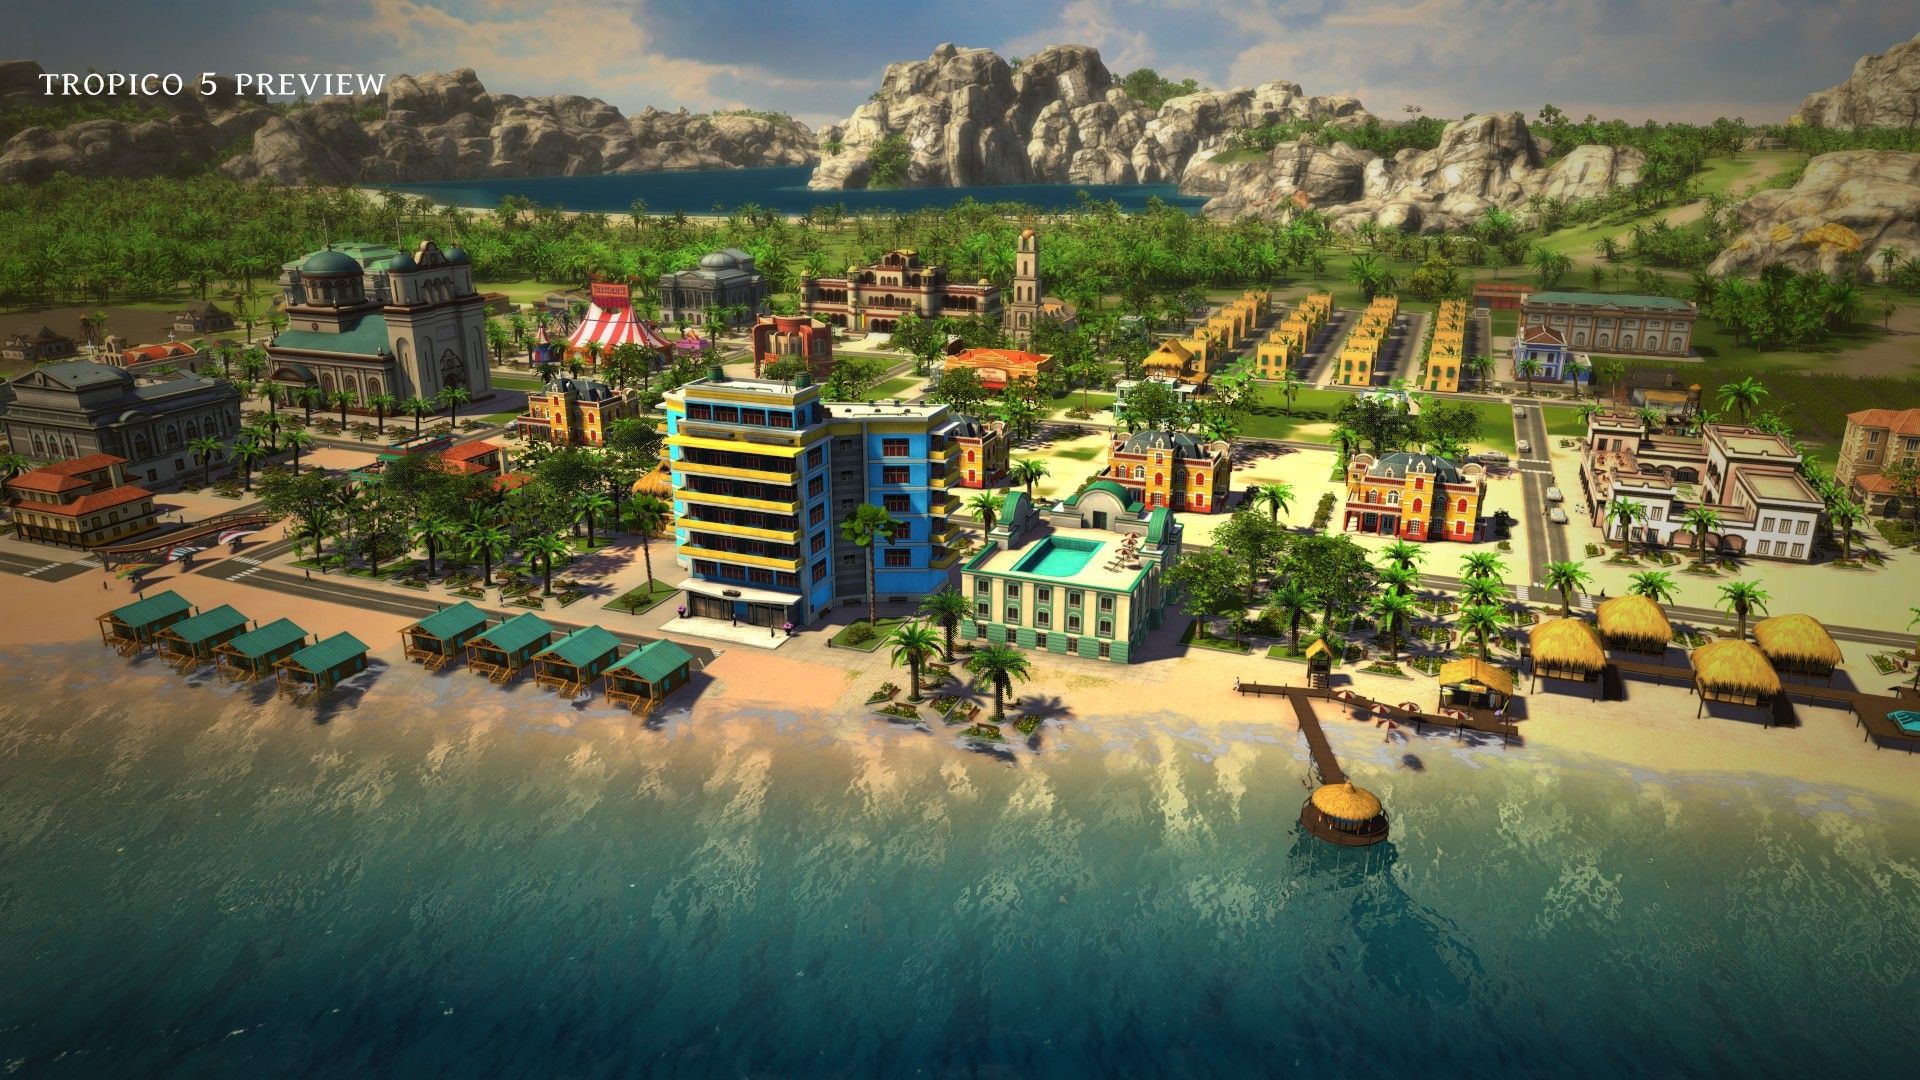 Type in the game Tropico 5 wallpapers and image